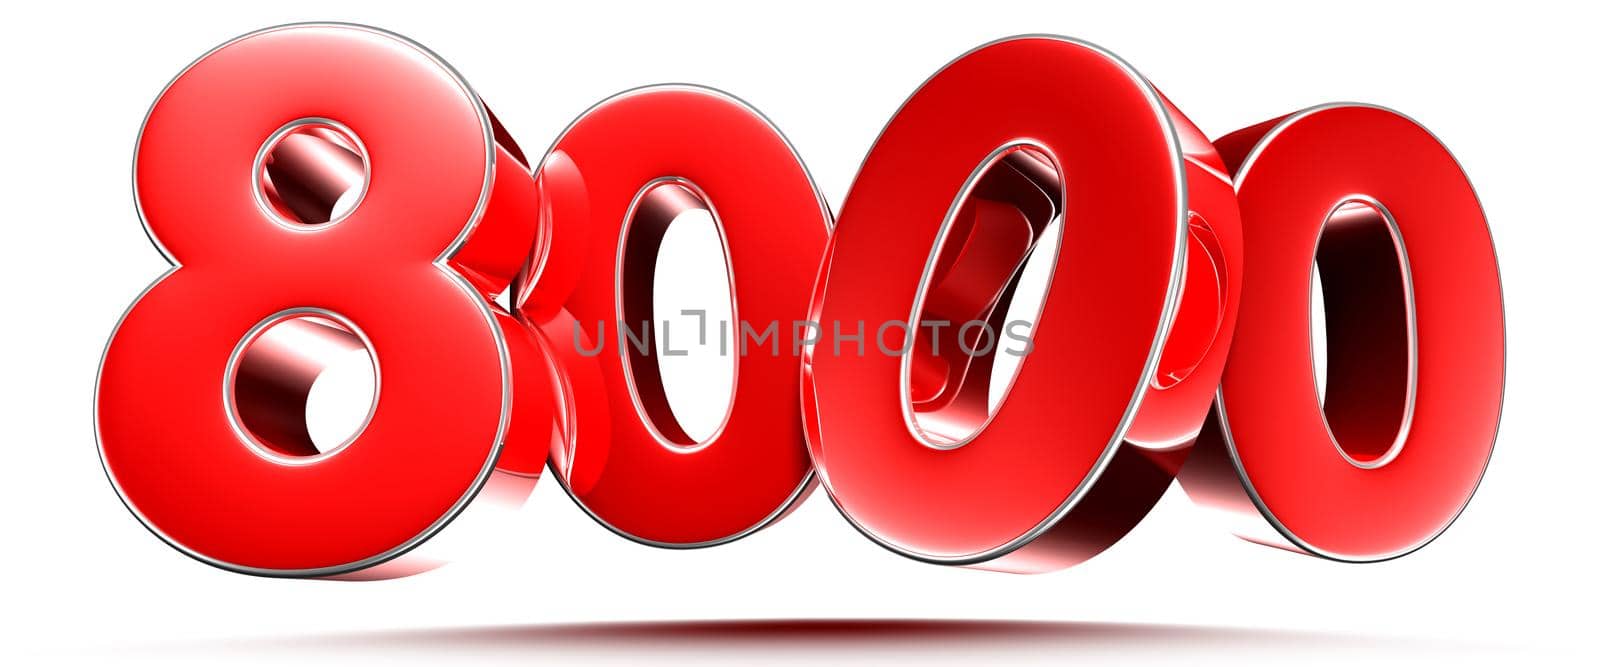 Rounded red numbers 8000 on white background 3D illustration with clipping path